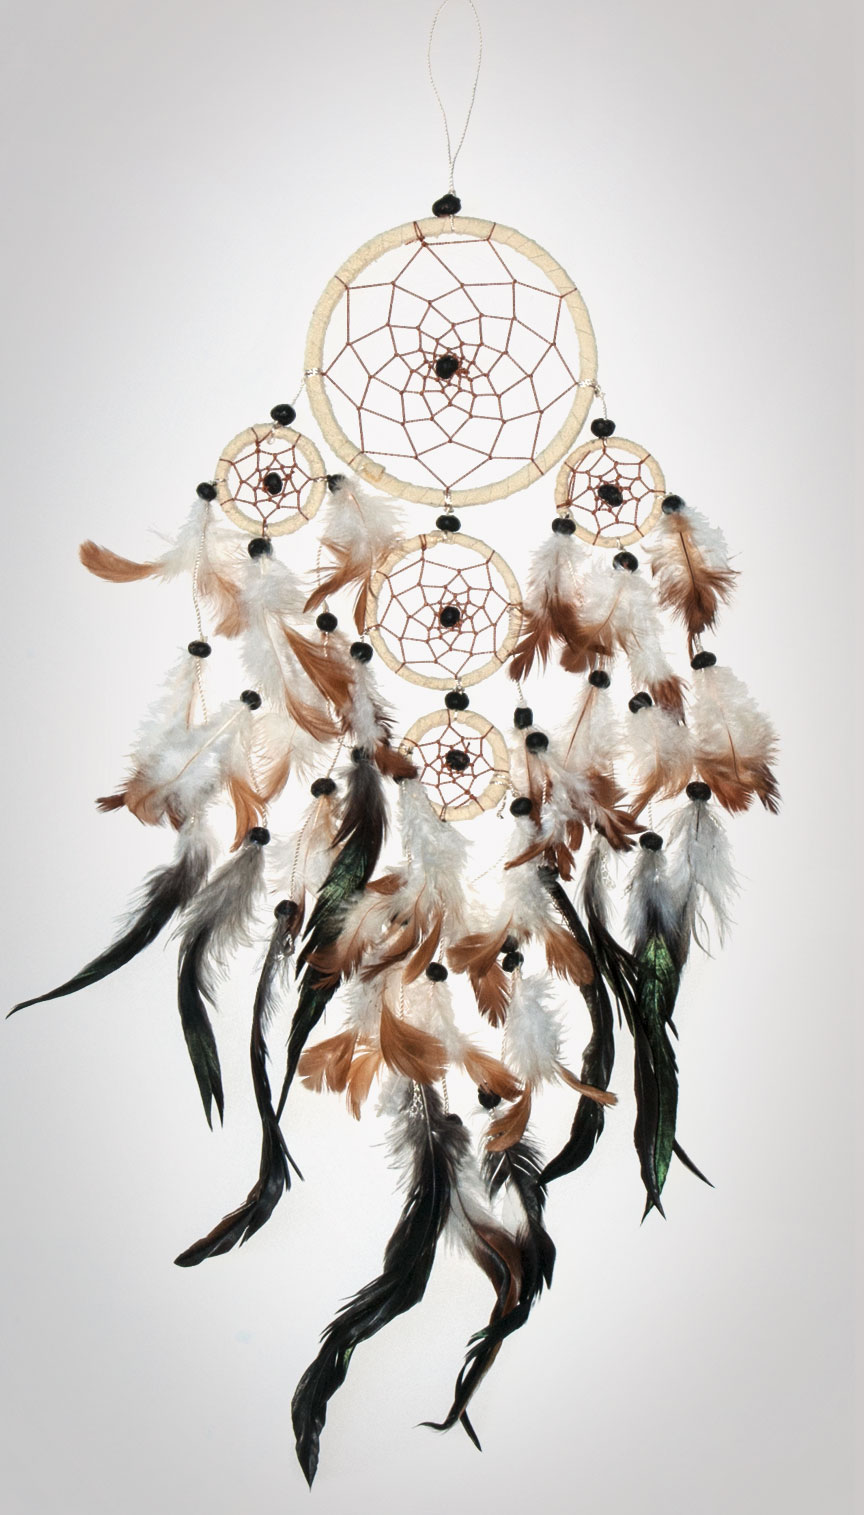 Shows an image of our dreamcatcher owg012